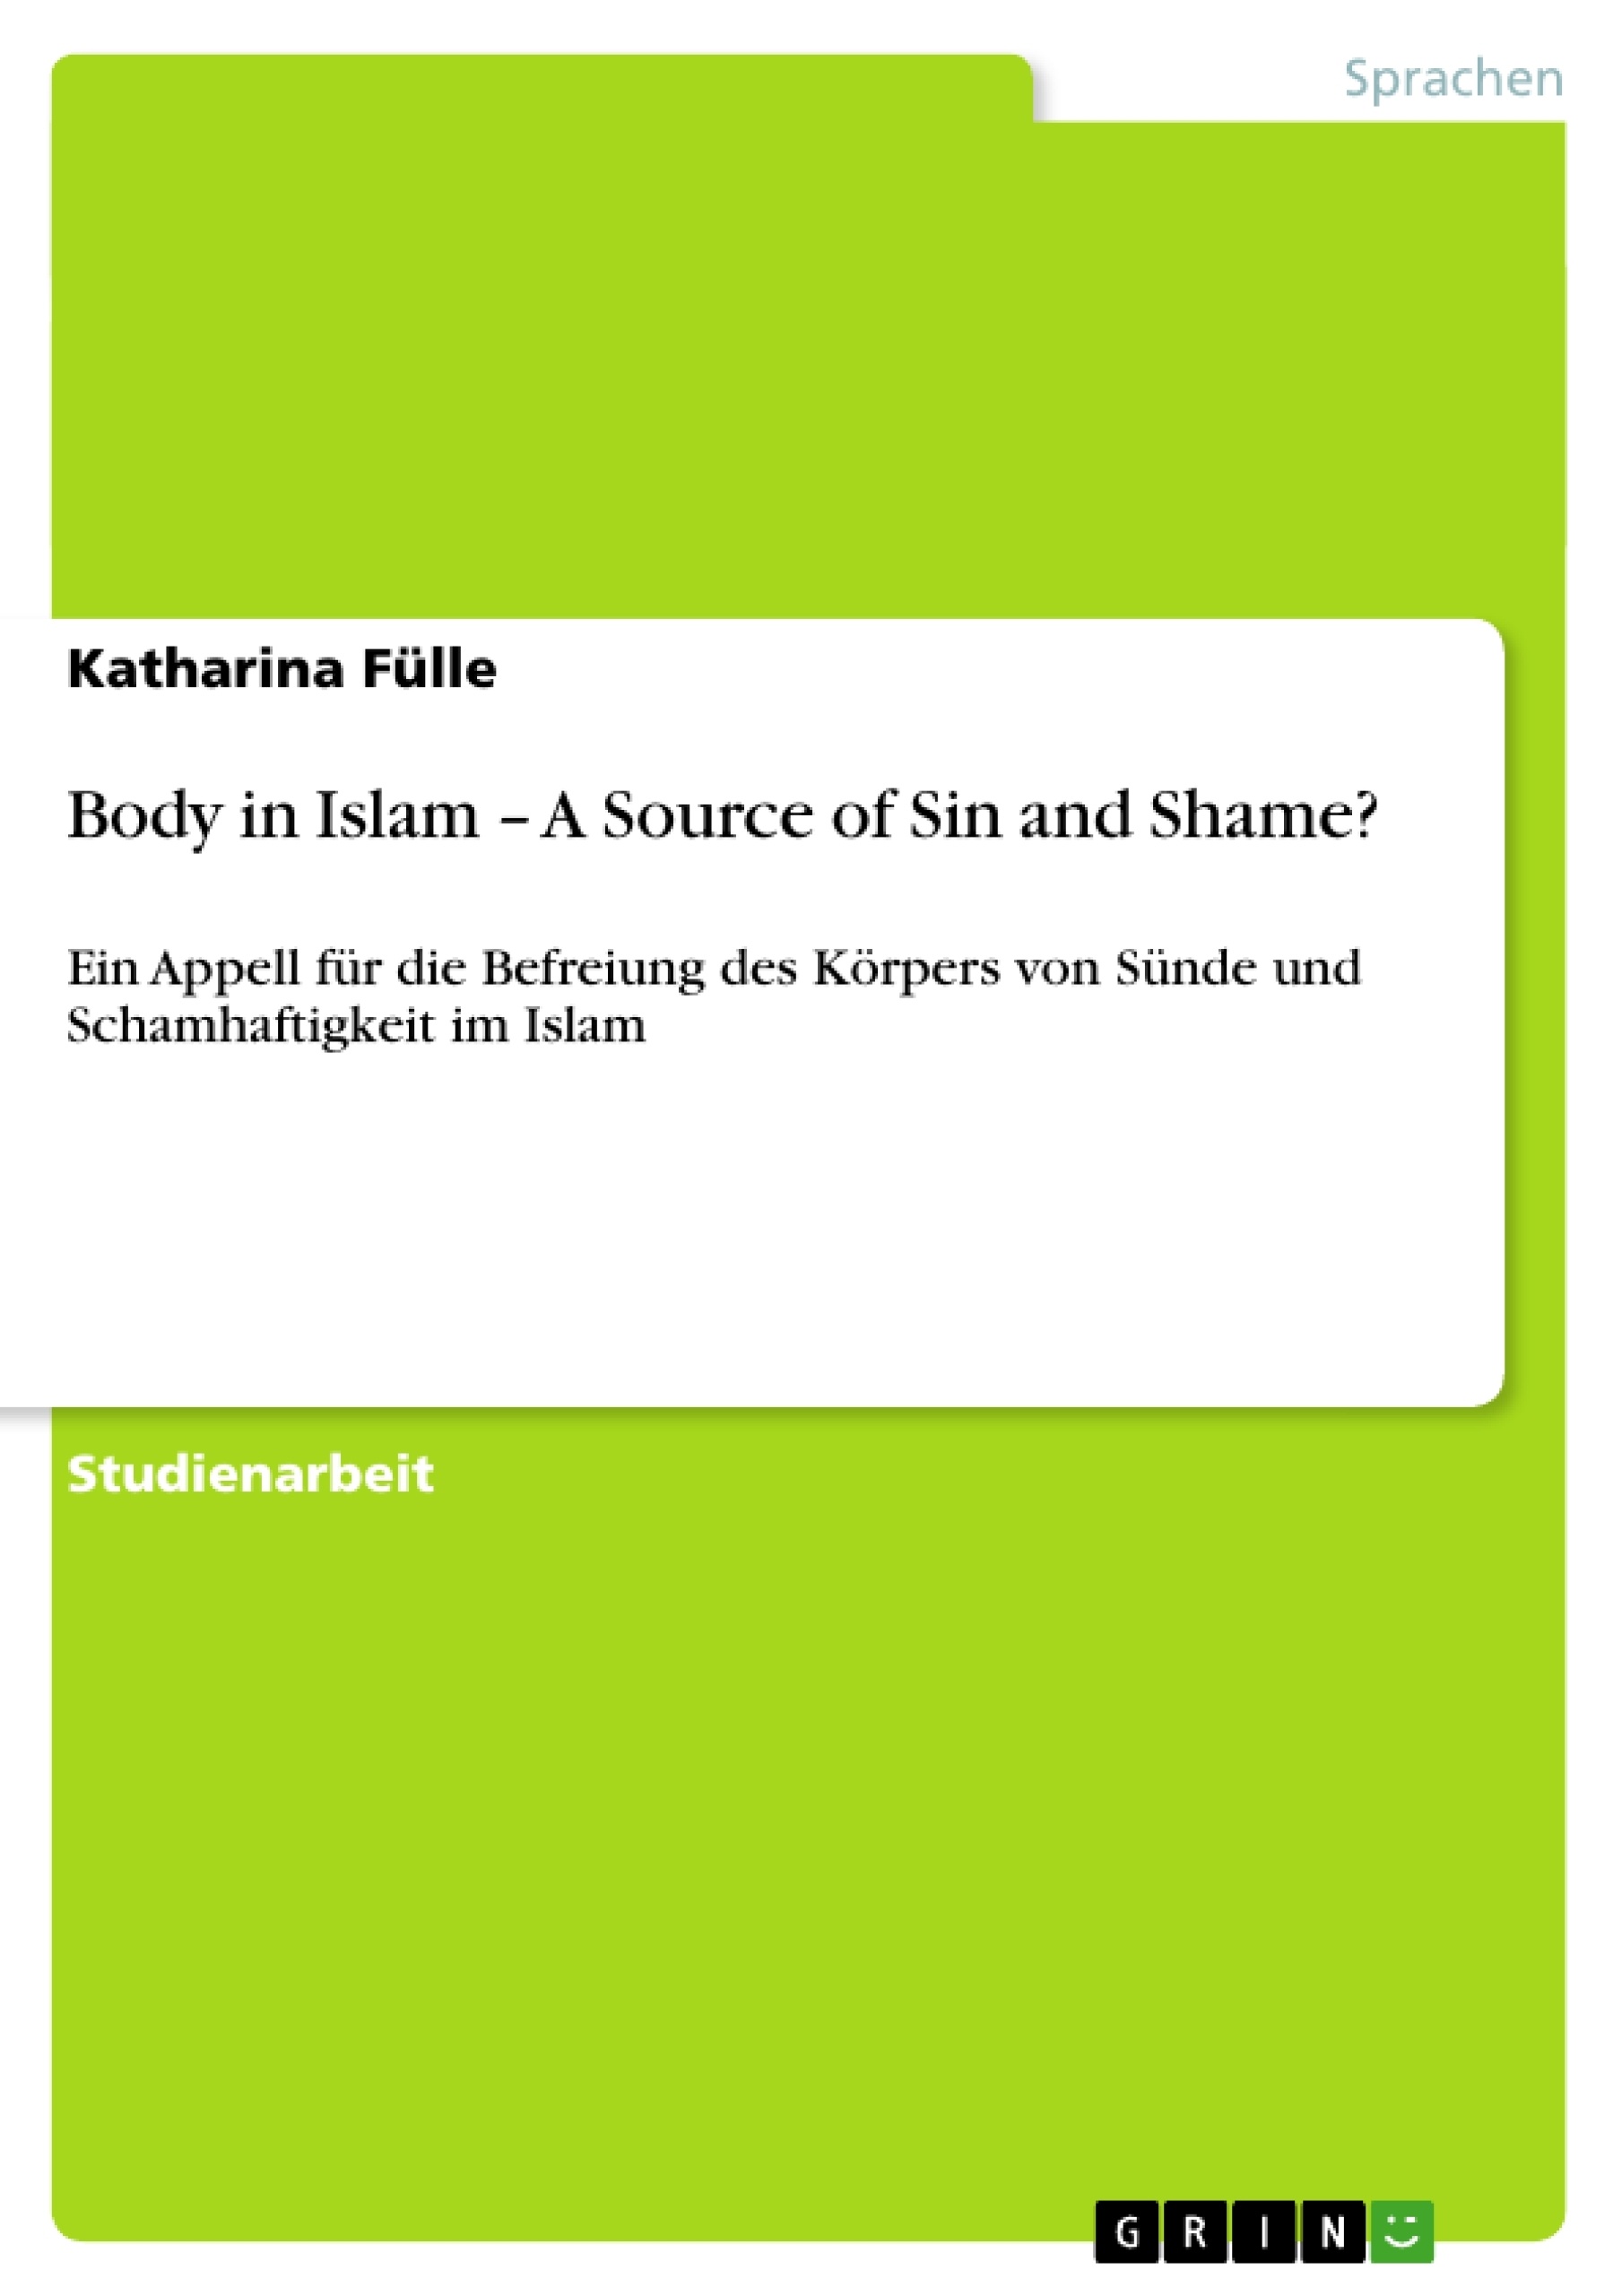 Titre: Body in Islam – A Source of Sin and Shame?